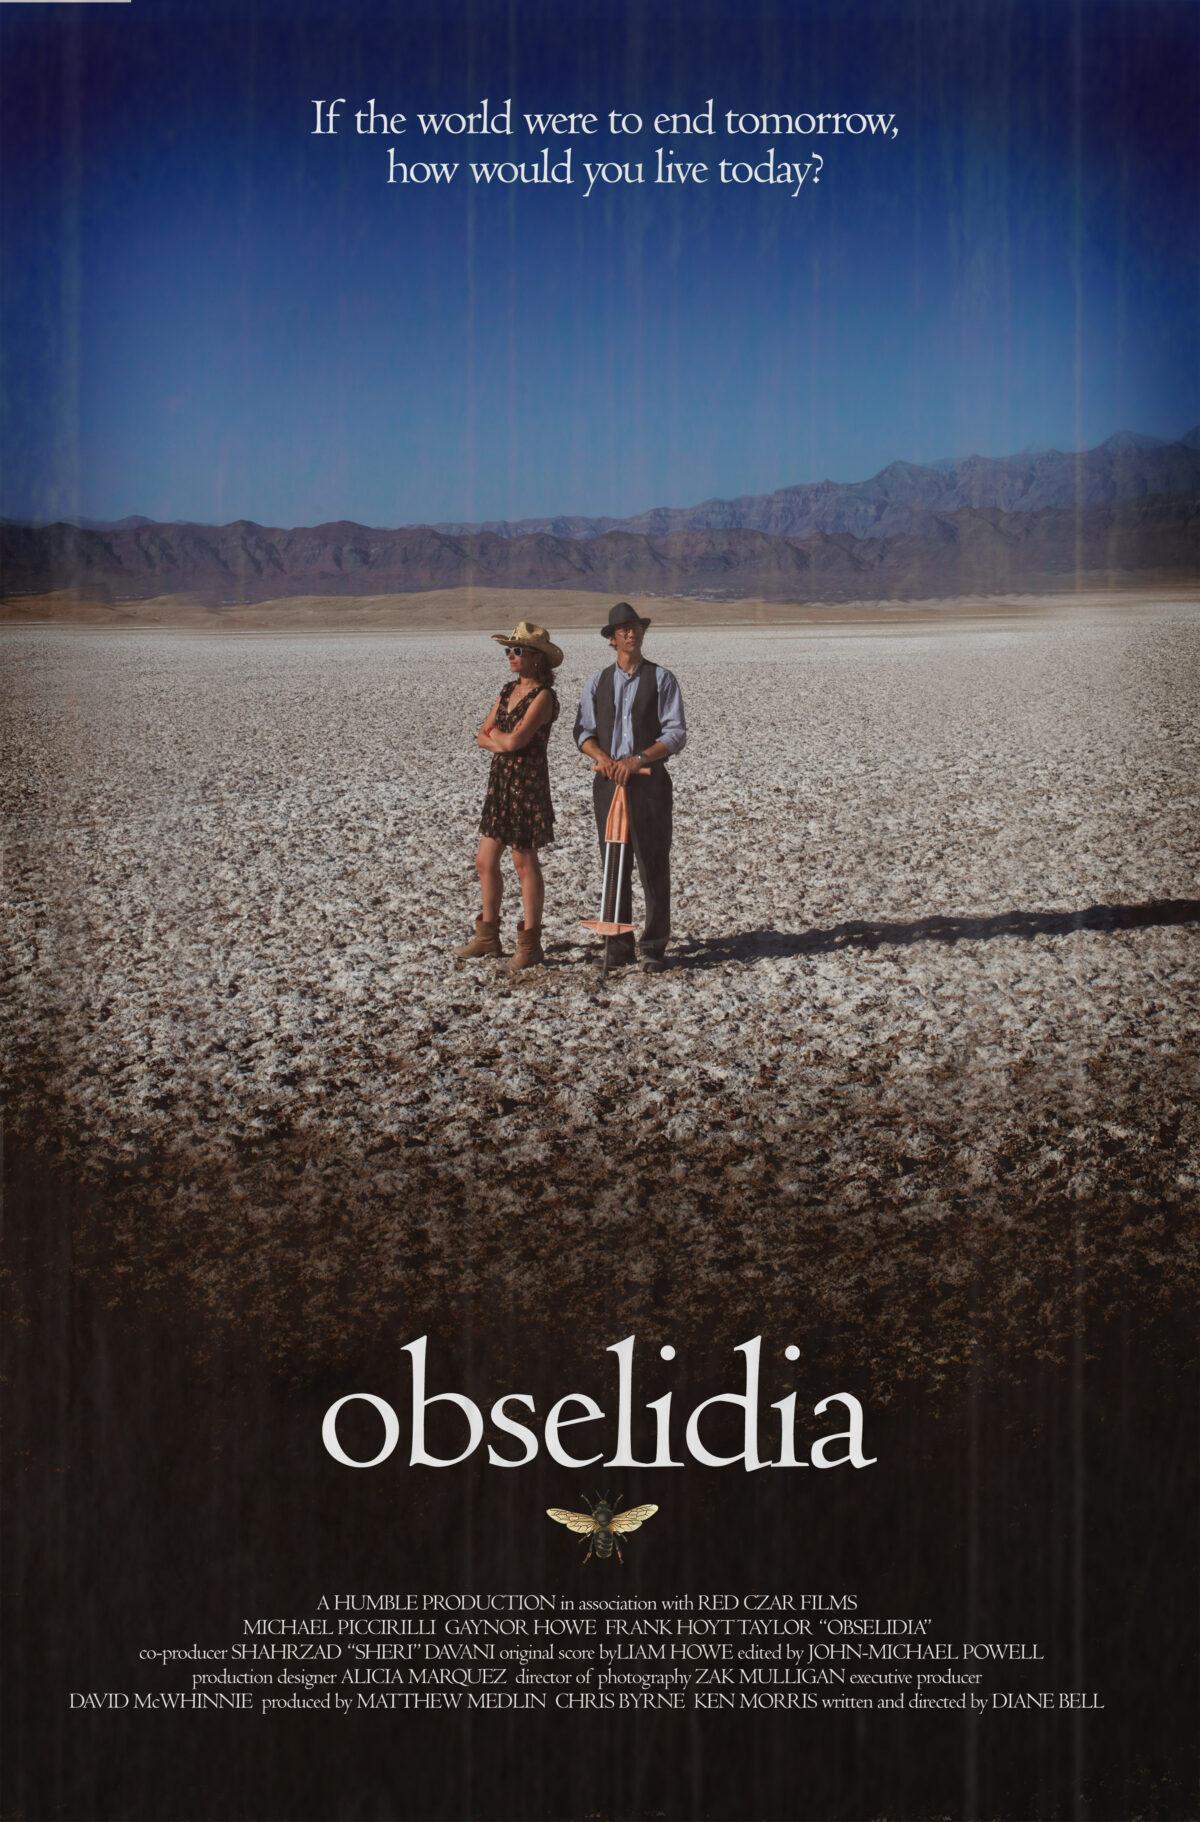 A still from Diane Bell’s 2010 film “Obselidia,” in which a lonely librarian, who believes love is obsolete, learns otherwise. (Rebel Heart Films)